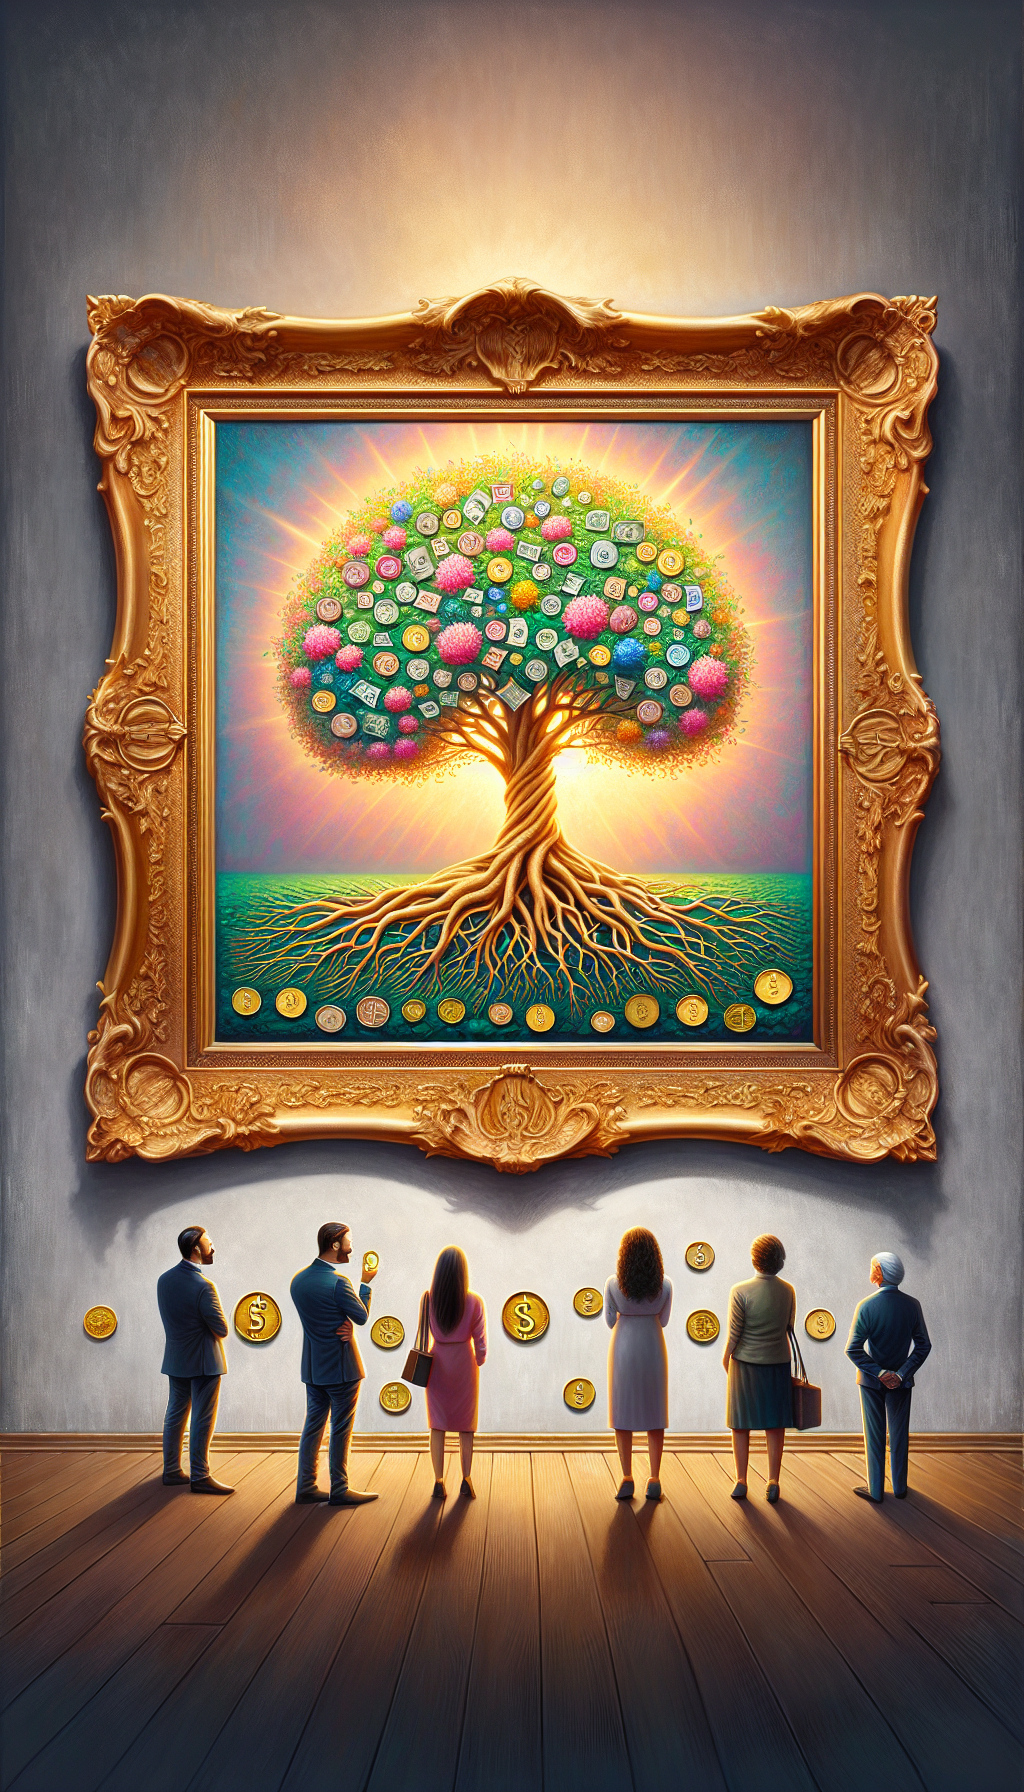 An elegant, golden frame encases a vibrant canvas that transforms into a flourishing money tree, its roots wrapping around the frame and its leaves subtly shaped like various currencies and tiny classic art icons. A soft light shines down, hinting at the appreciation of value, while art buyers and collectors gaze in awe, their reflections in small coins at the painting's base.